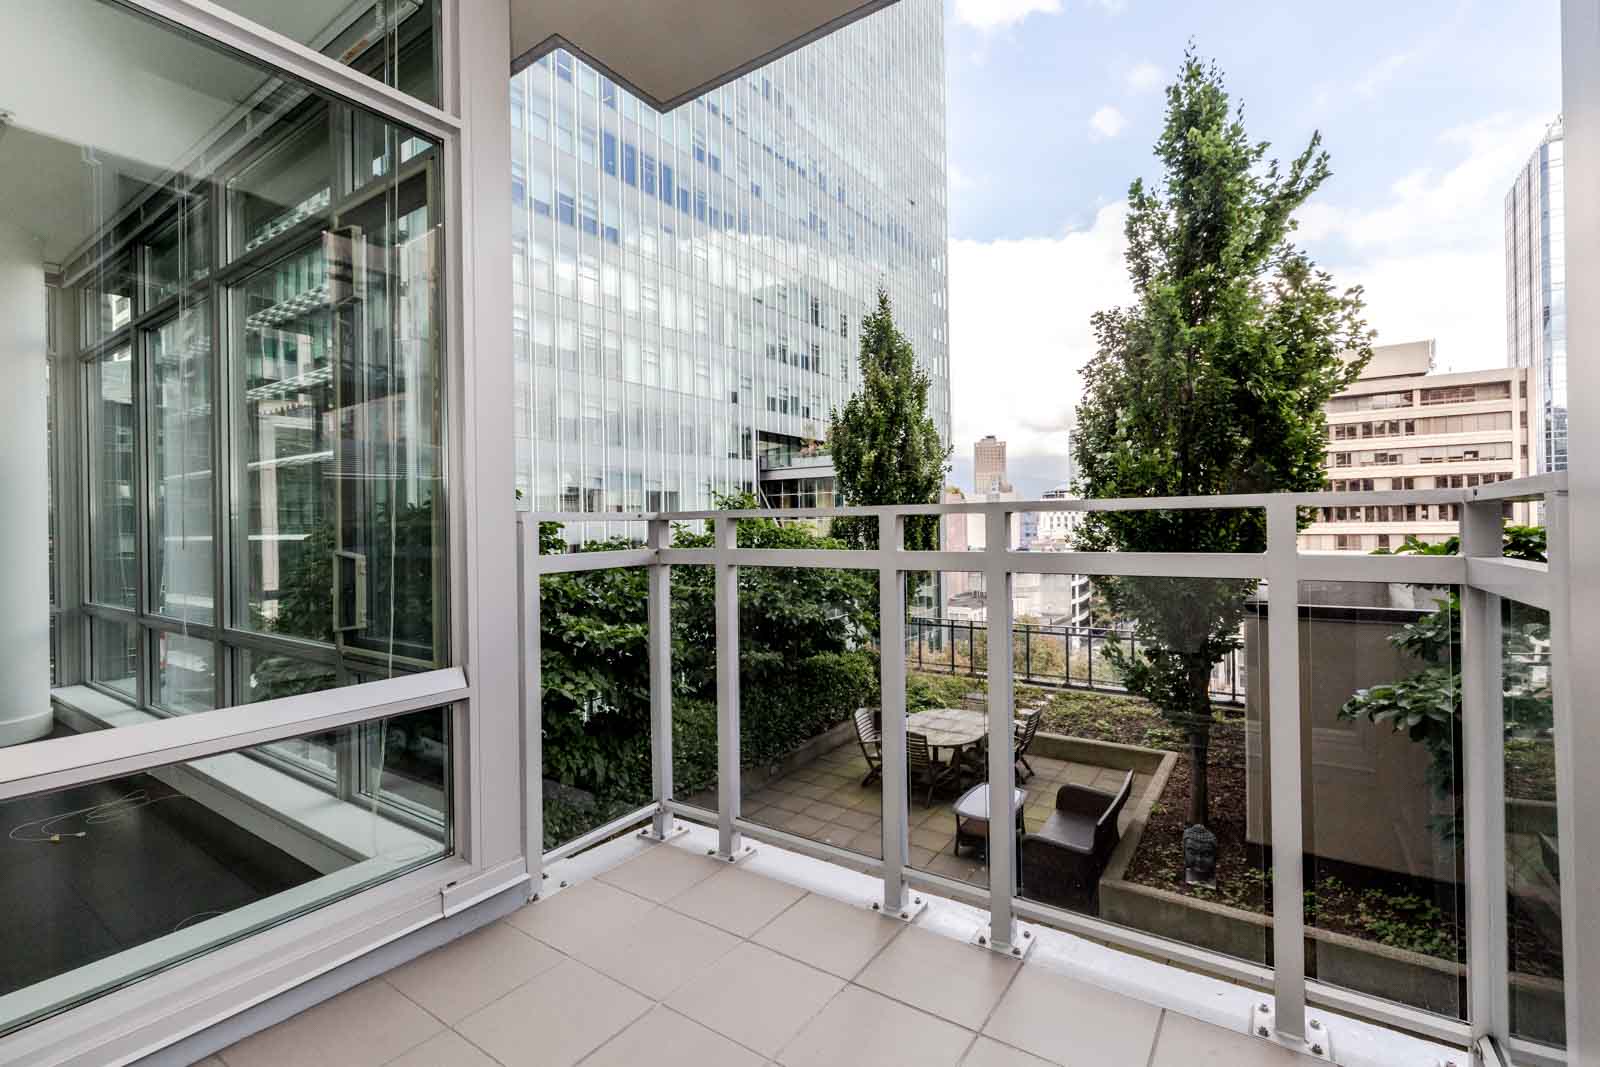 Balcony at L'Hermitage Luxury Rental Listed by Birds Nest Rental Property Management